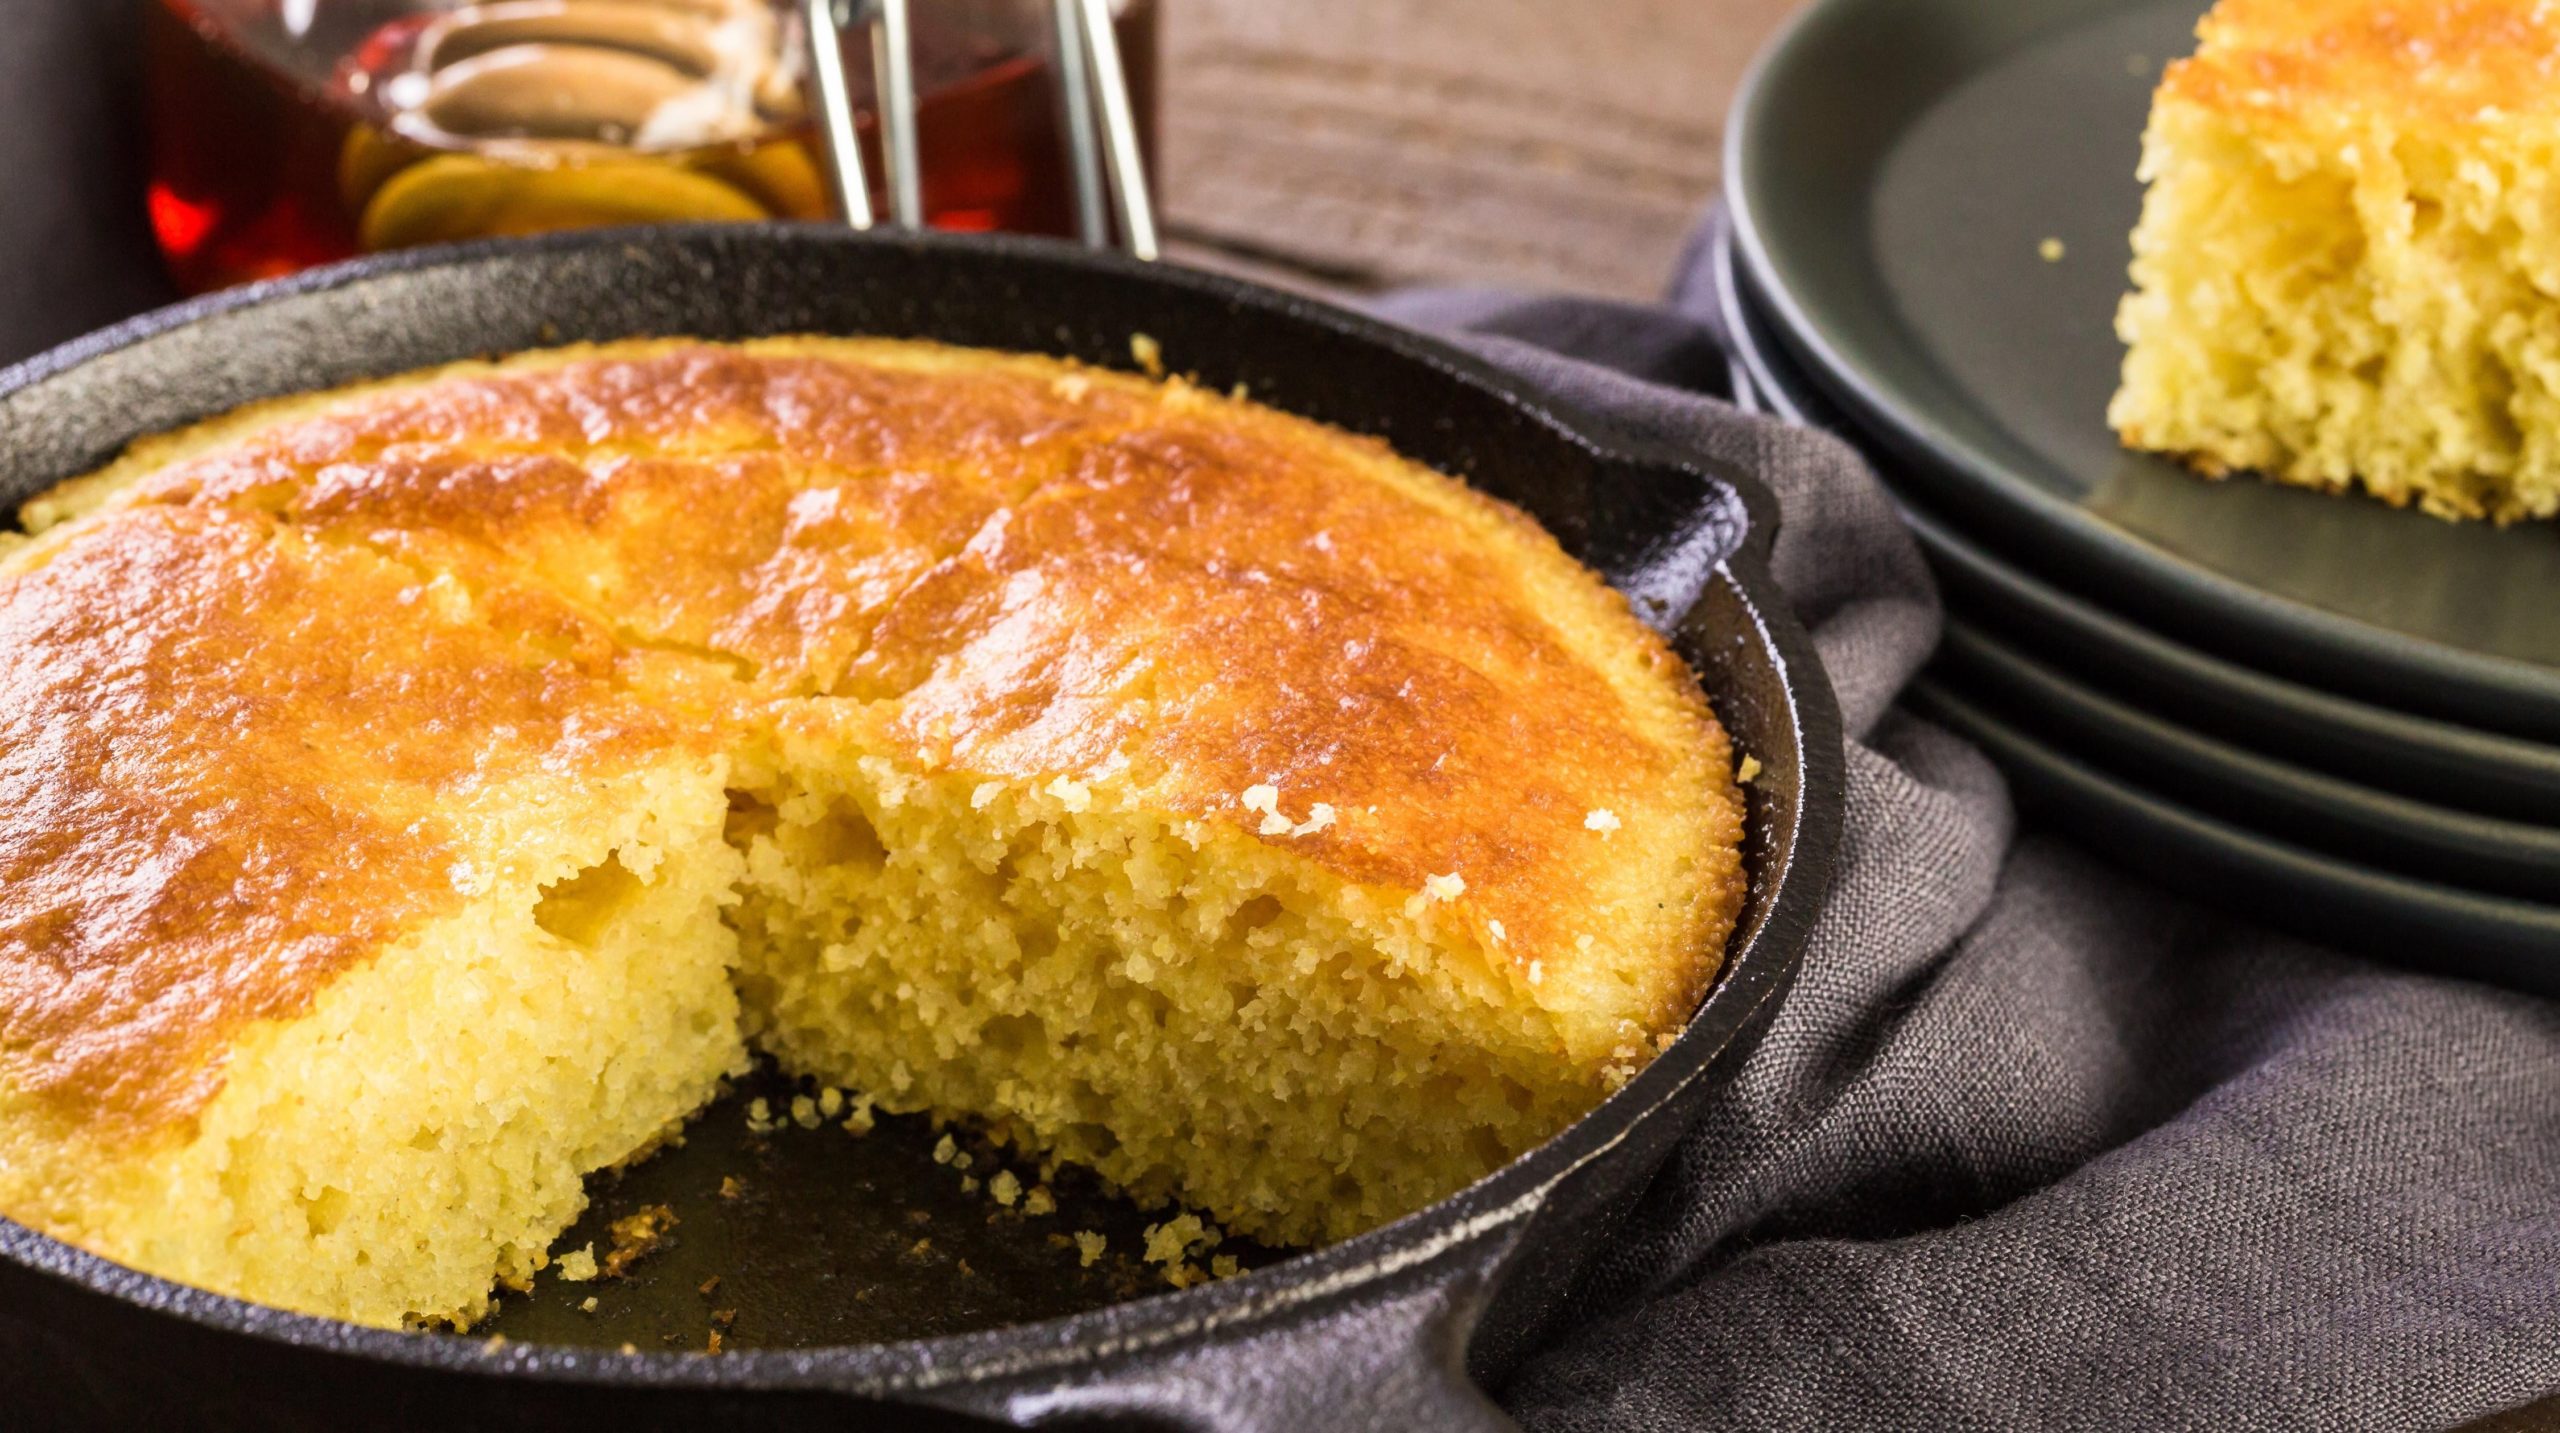 There’s More Than One Way to Make ‘Authentic’ Cornbread